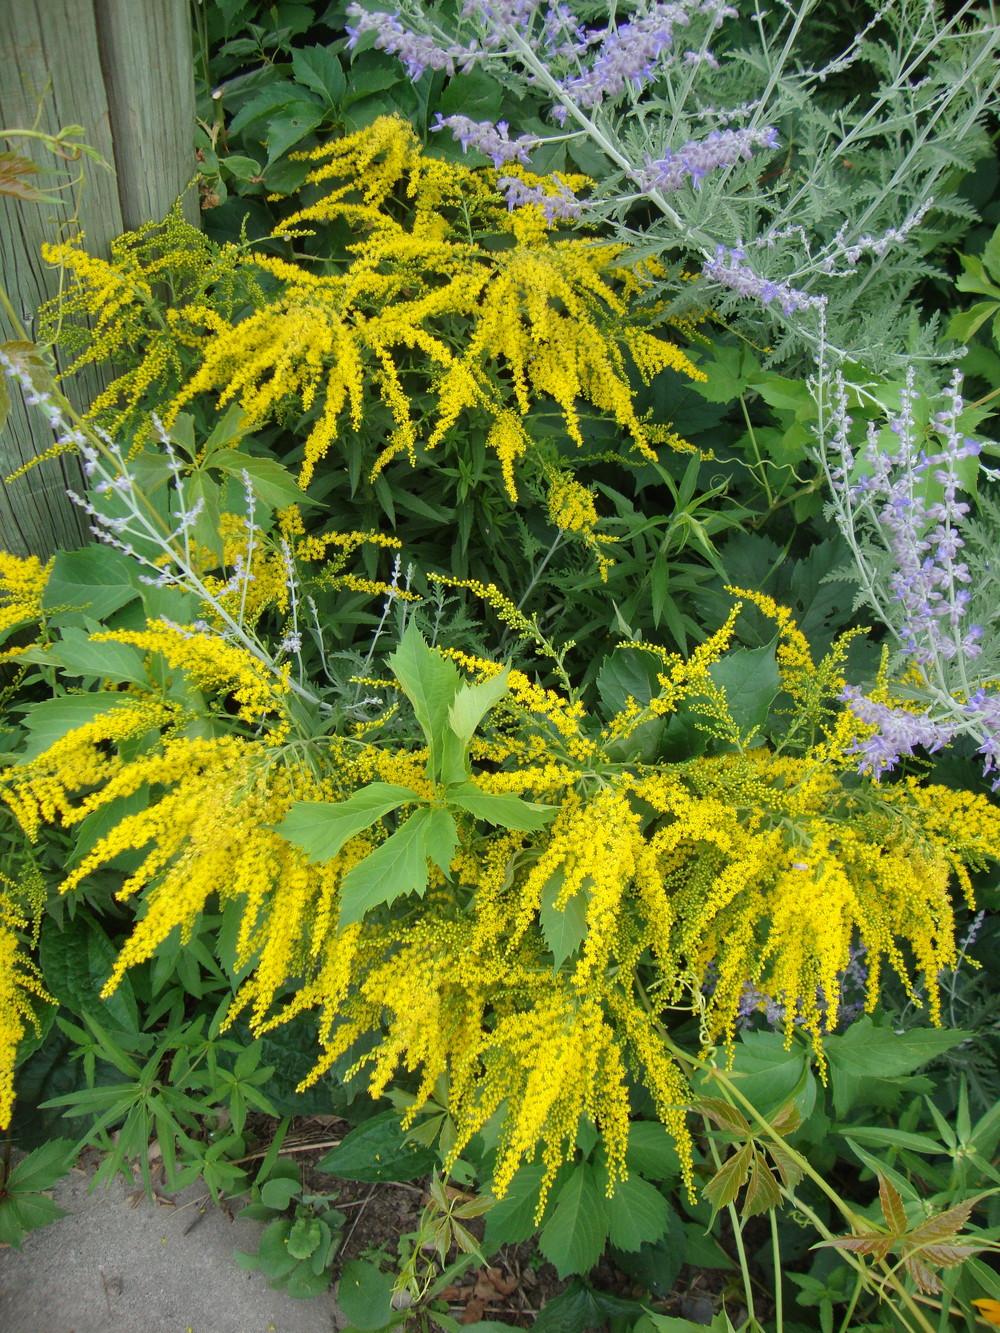 Photo of Goldenrods (Solidago) uploaded by Paul2032